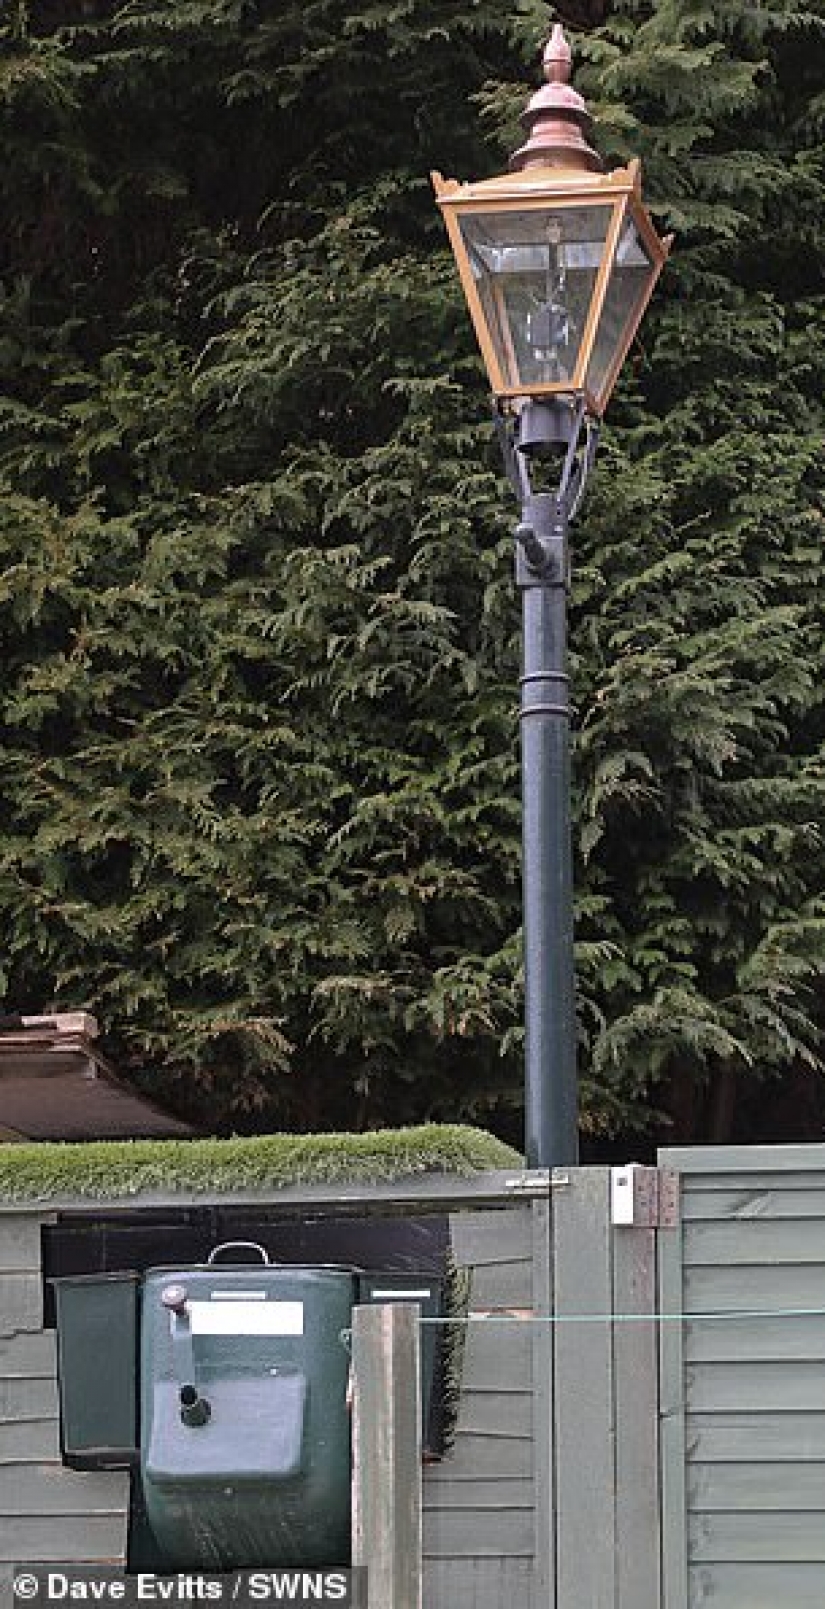 The inventor from the UK has created a street lamp that runs on dog Poo